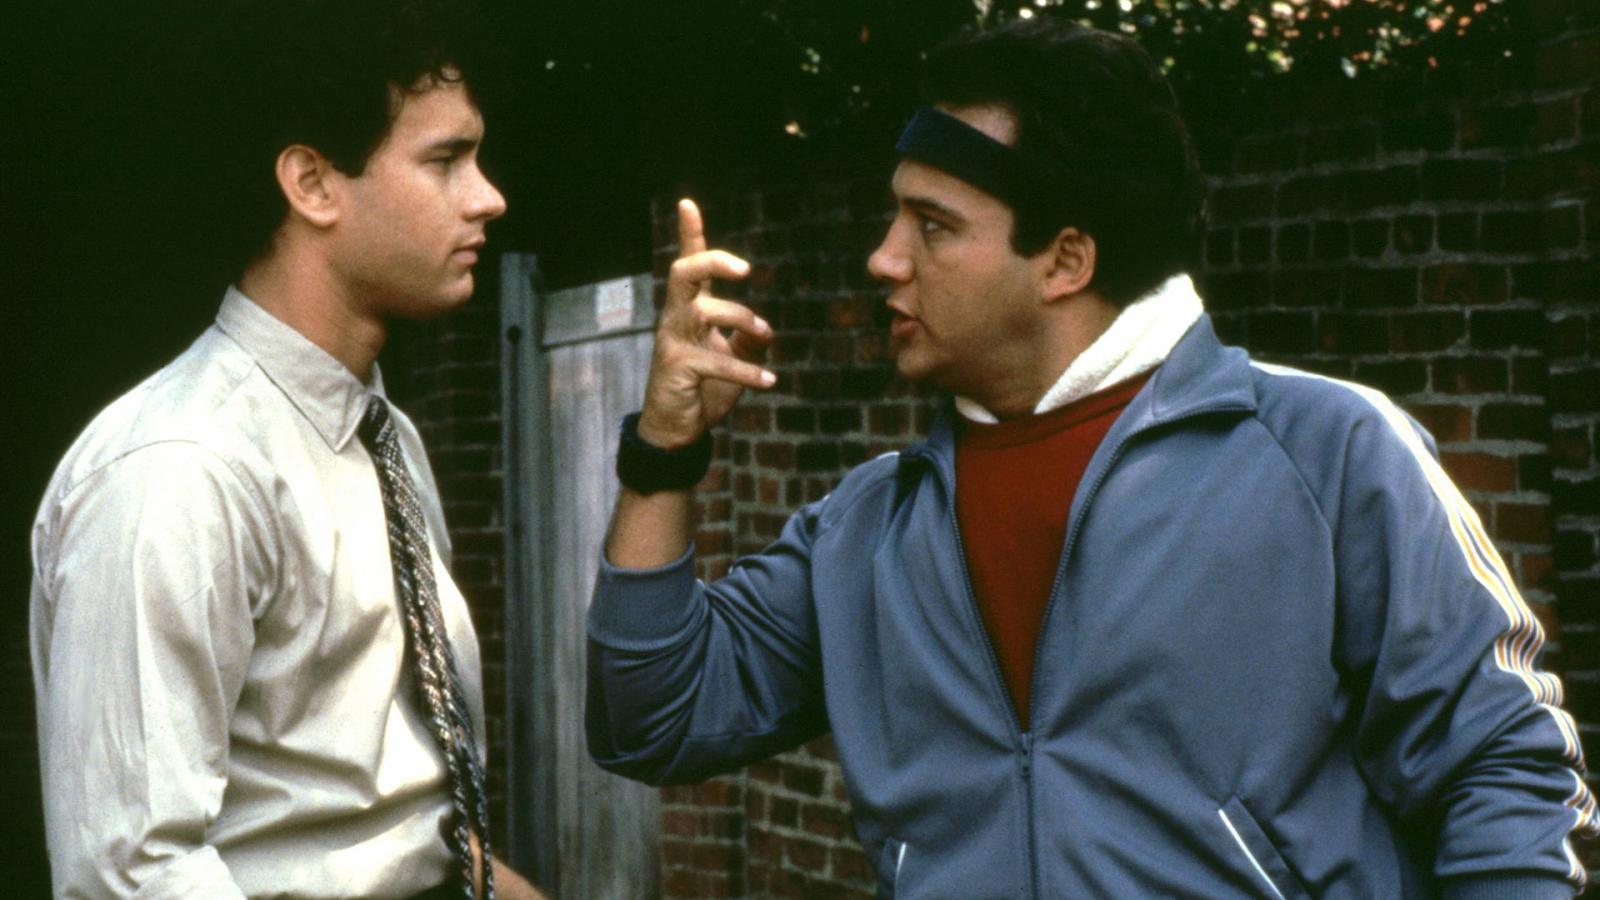 15 Most Underrated Comedy Movies of the 1980s, Ranked - image 7